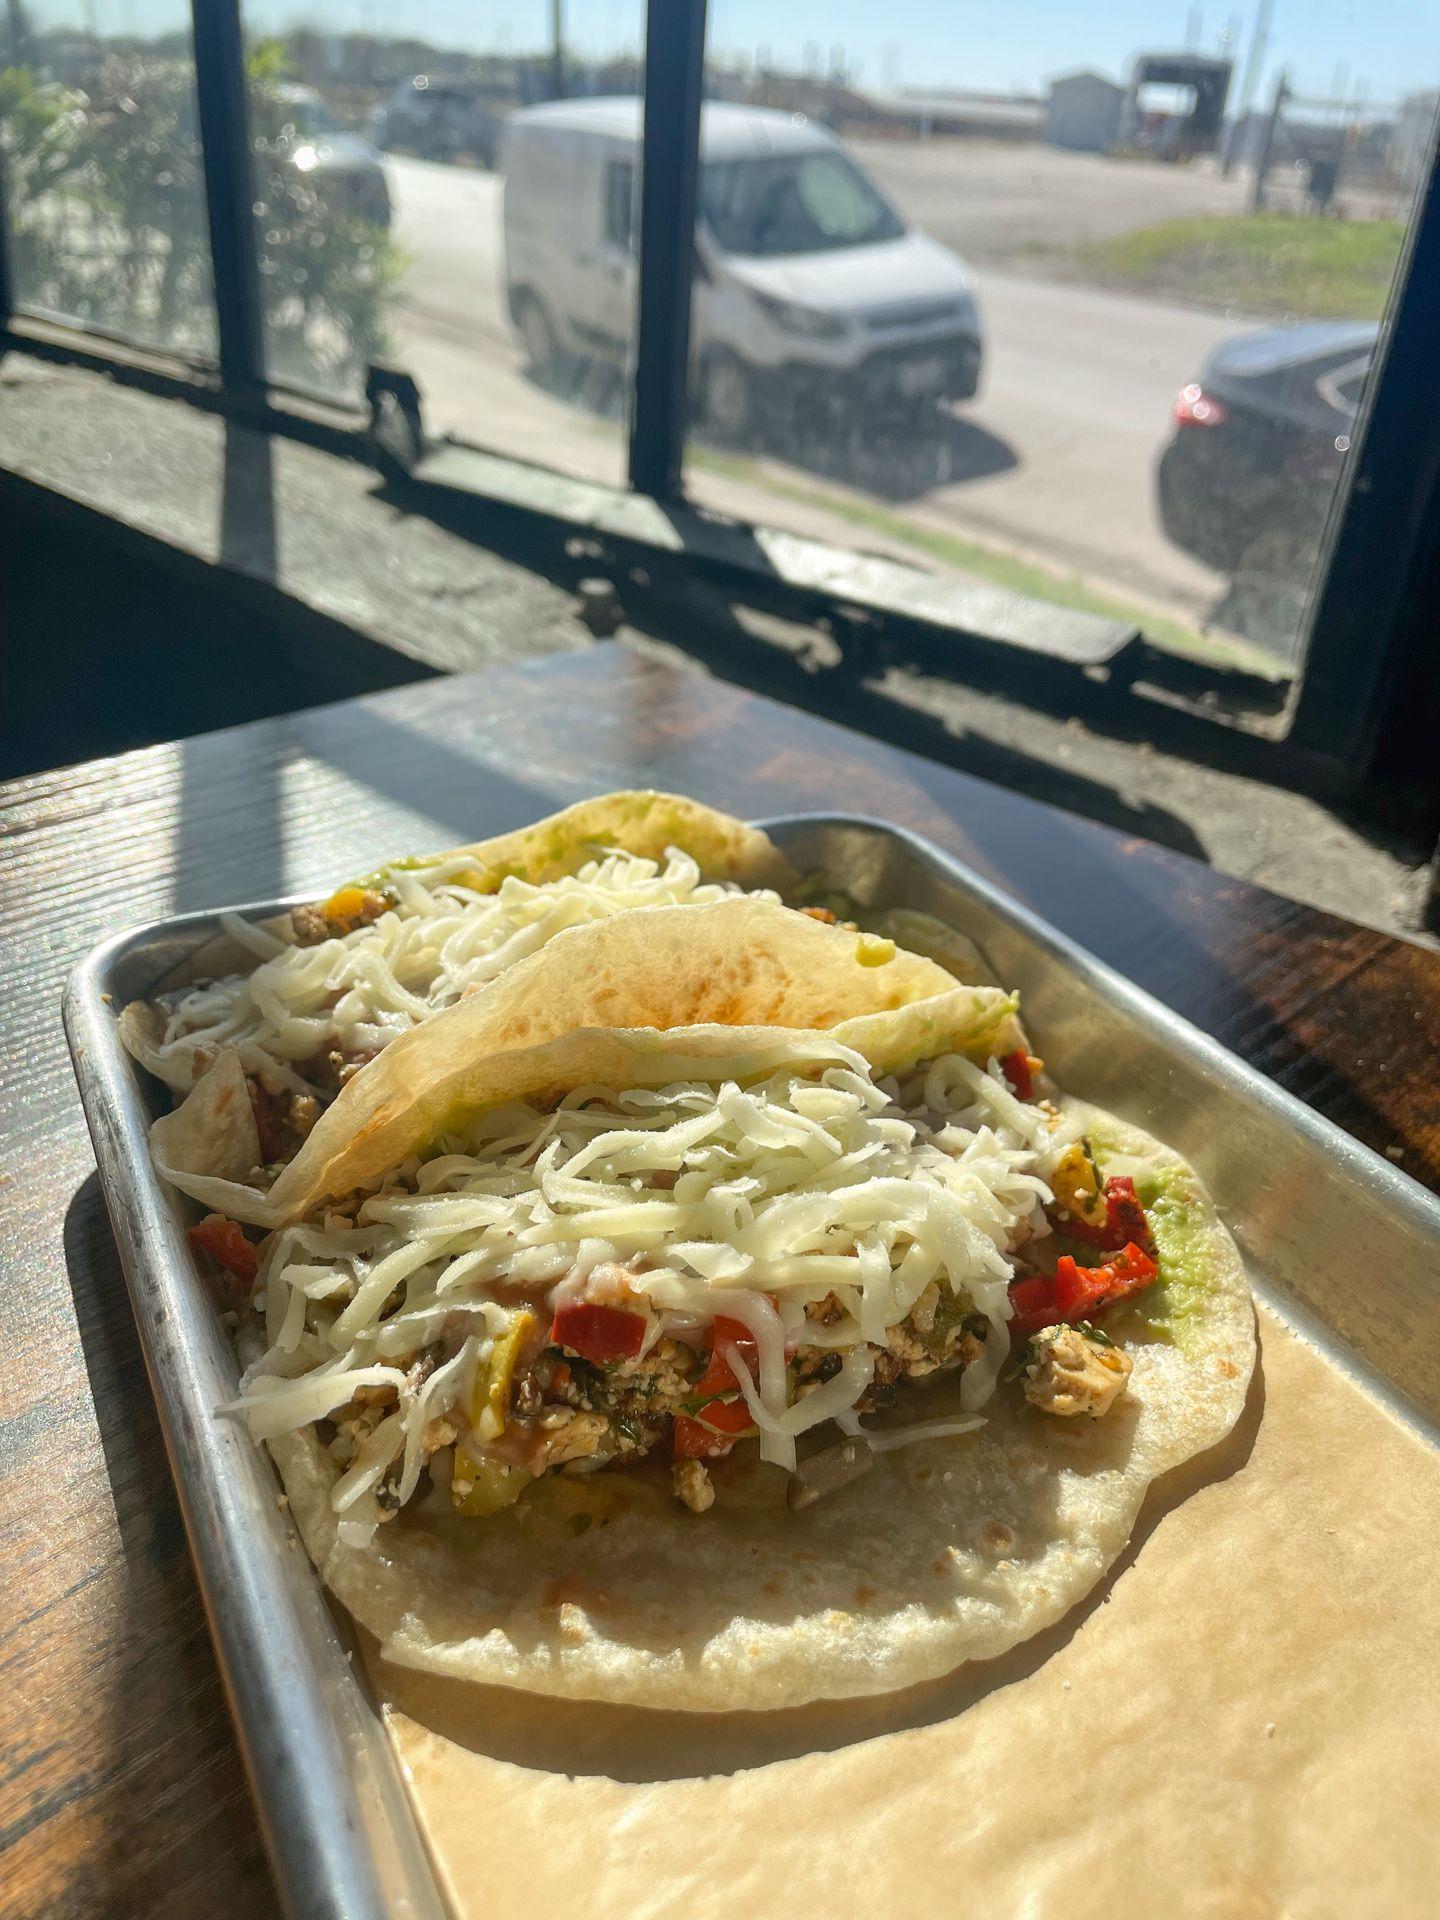 Two tacos with cheese, veggies and more from Segundo Coffee Lab